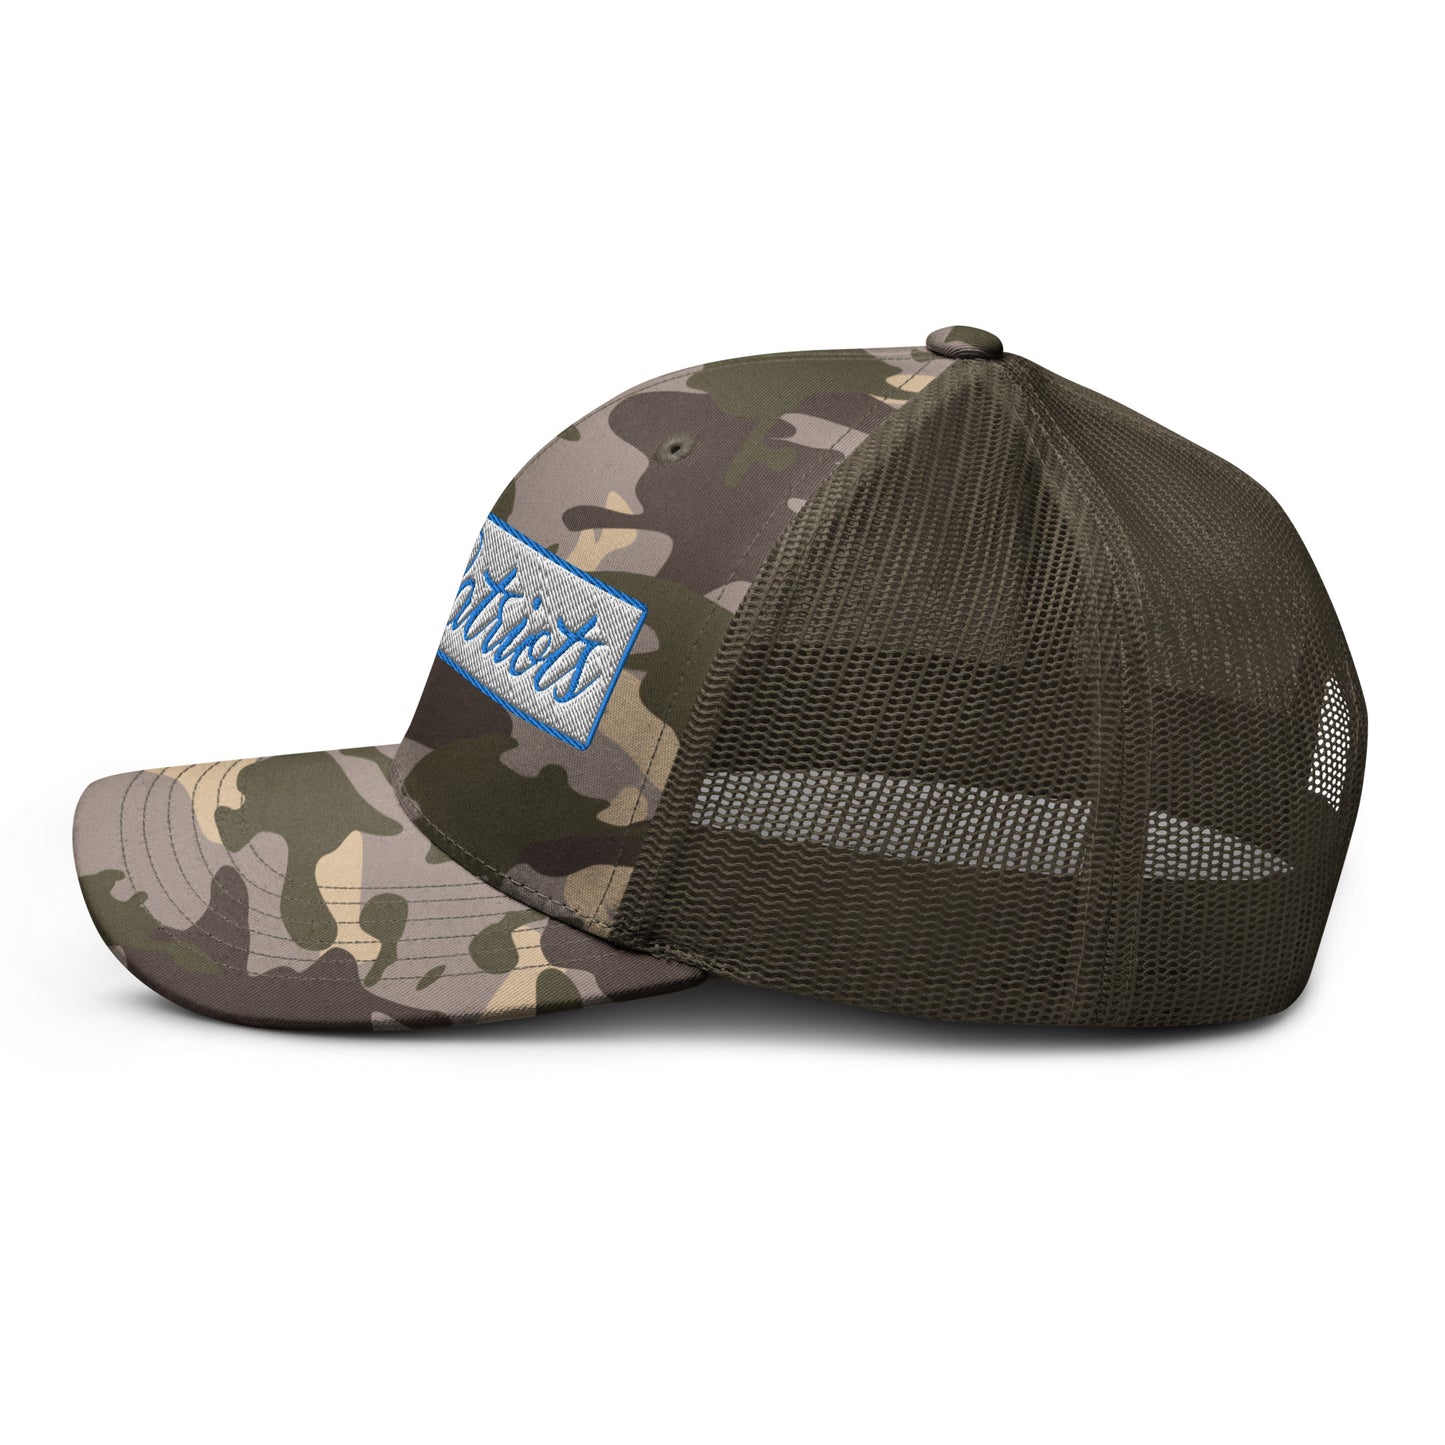 Only Patriots Camouflage trucker hat